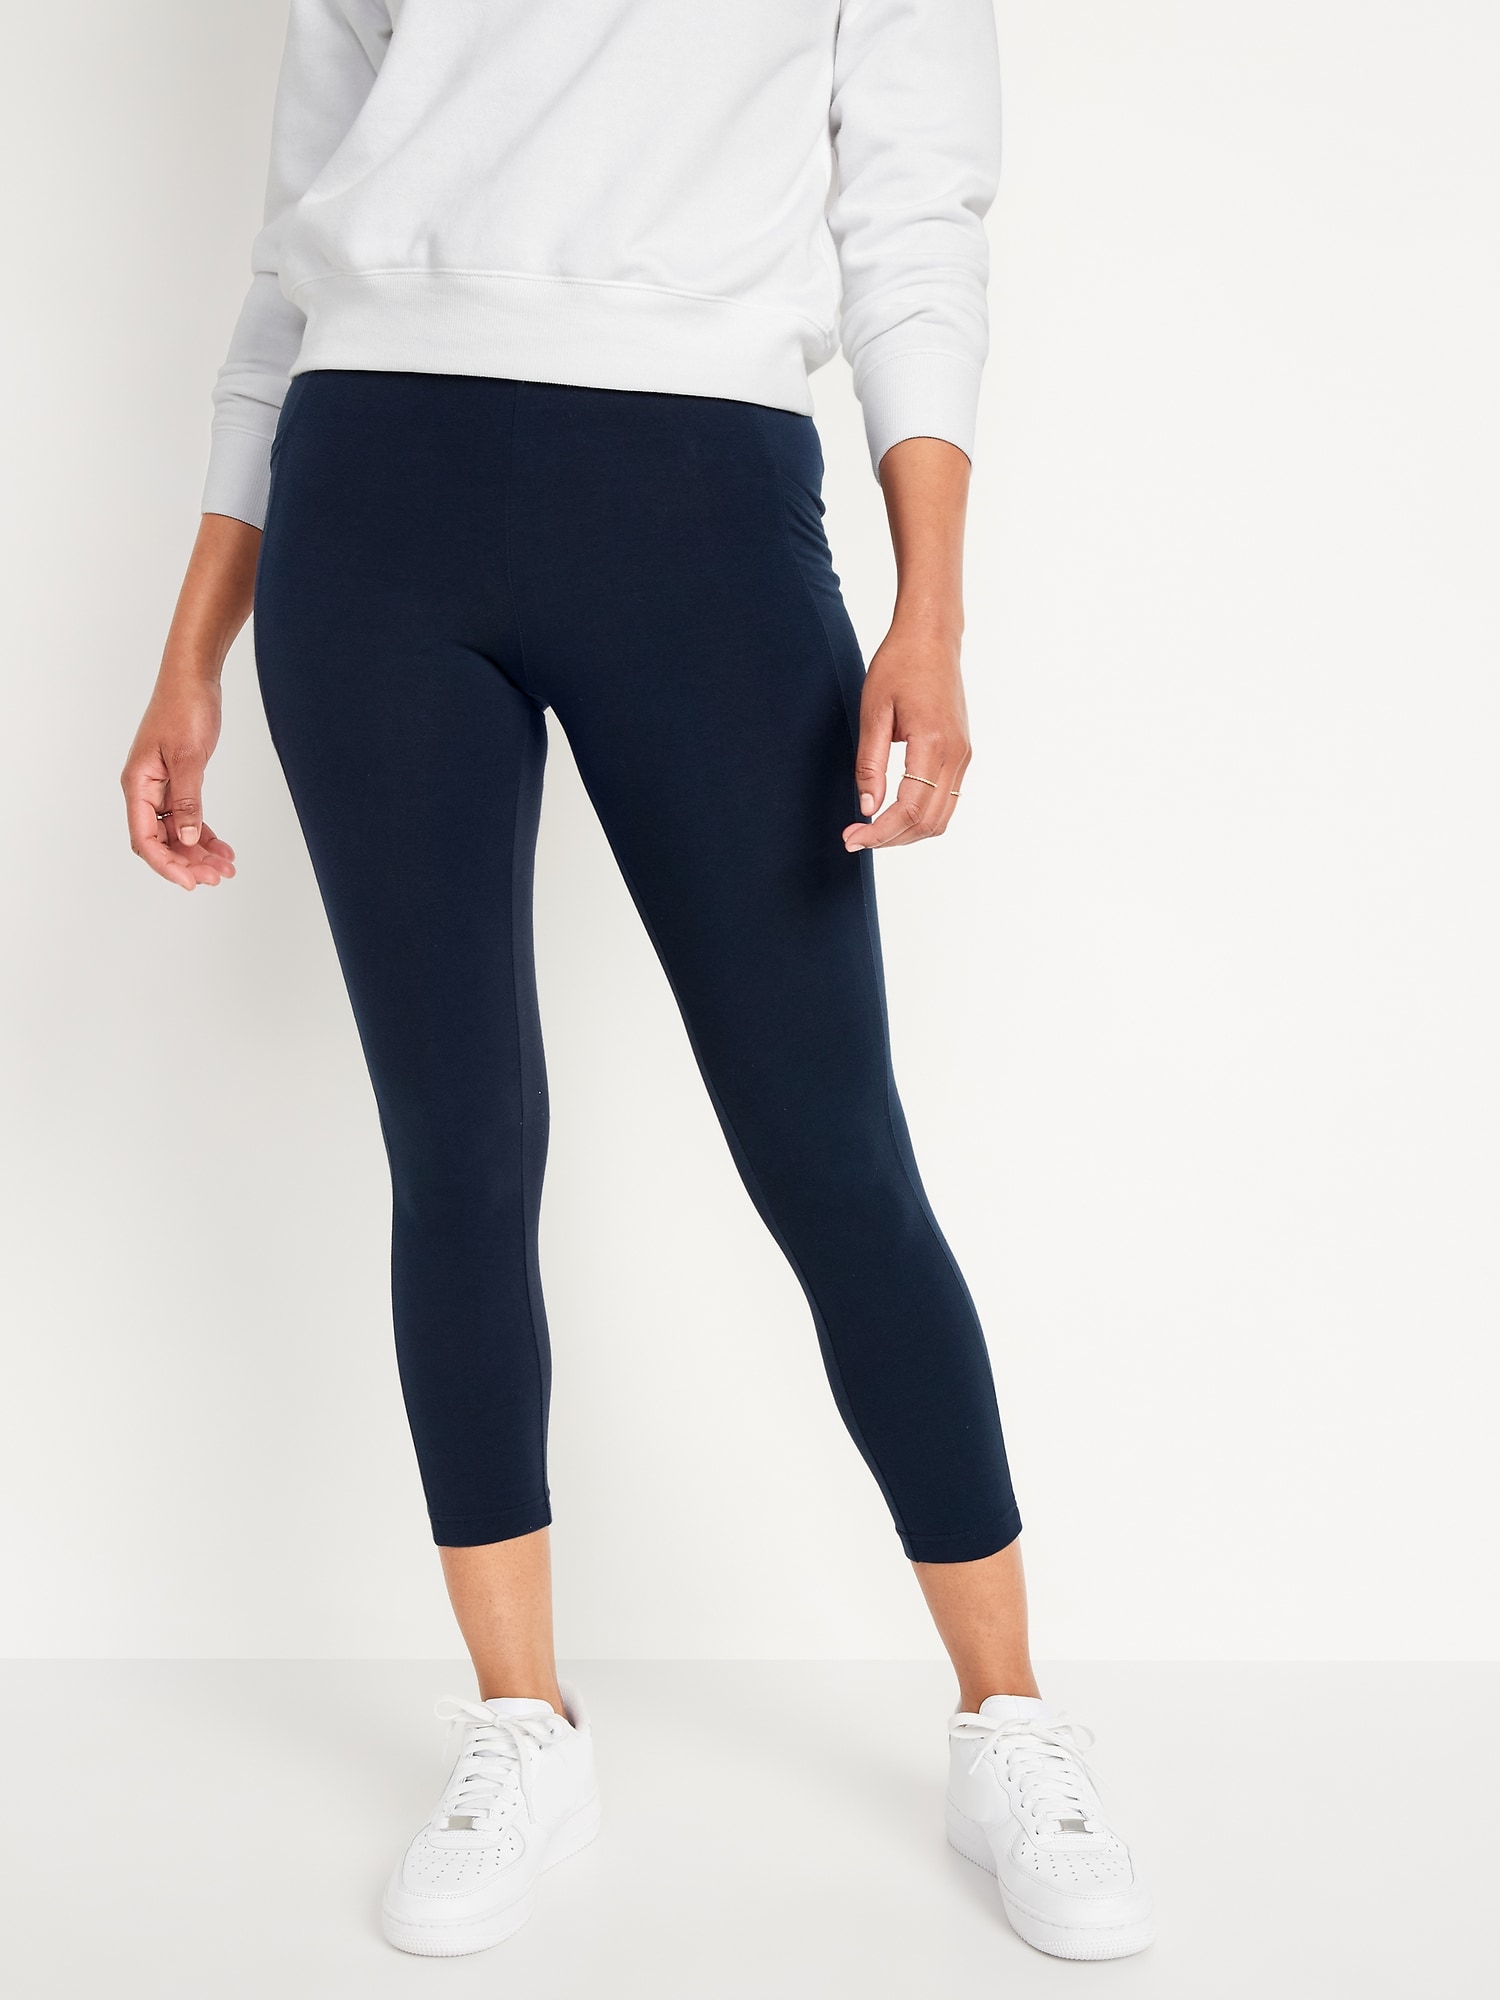 COPY - 🧘‍♀️NWT Old Navy Women's Active leggings Size Small.🧘‍♀️